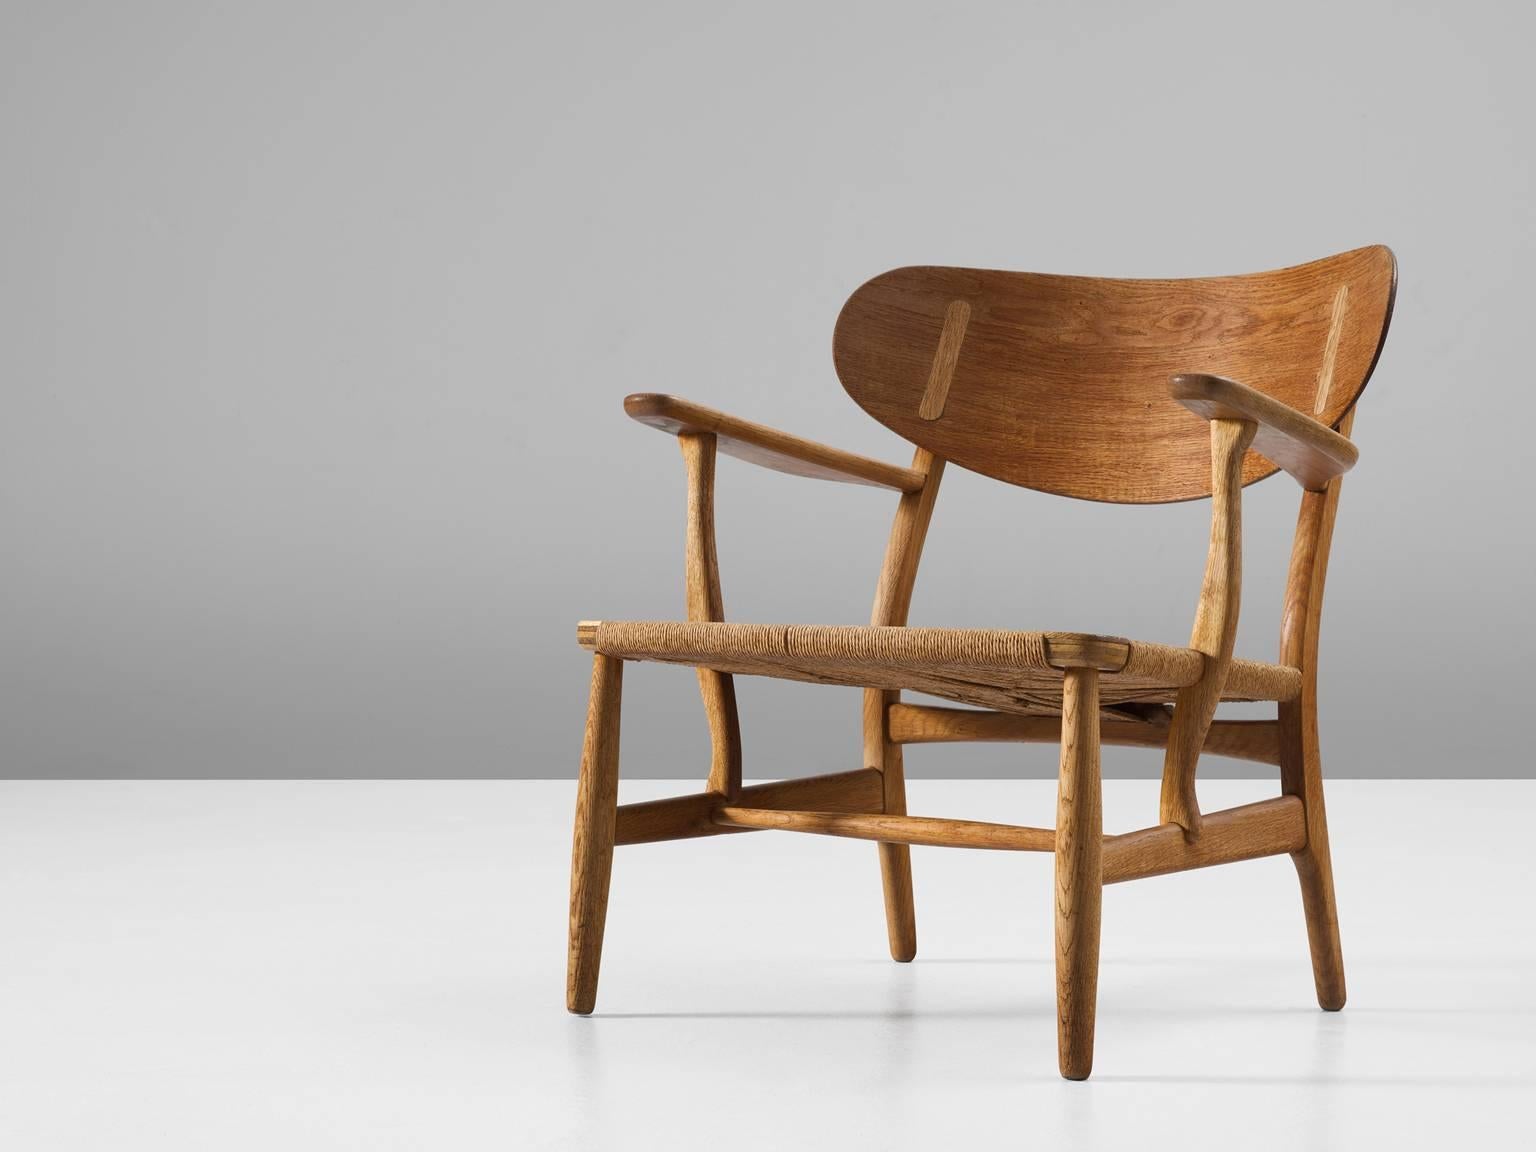 Armchair model CH22 in oak and paper cord by Hans J. Wegner for Carl Hansen & Søn, Denmark, 1950.

One of Wegners early masterpieces for Carl Hansen. The chair bears the first number of a highly interesting collection that was realized during the